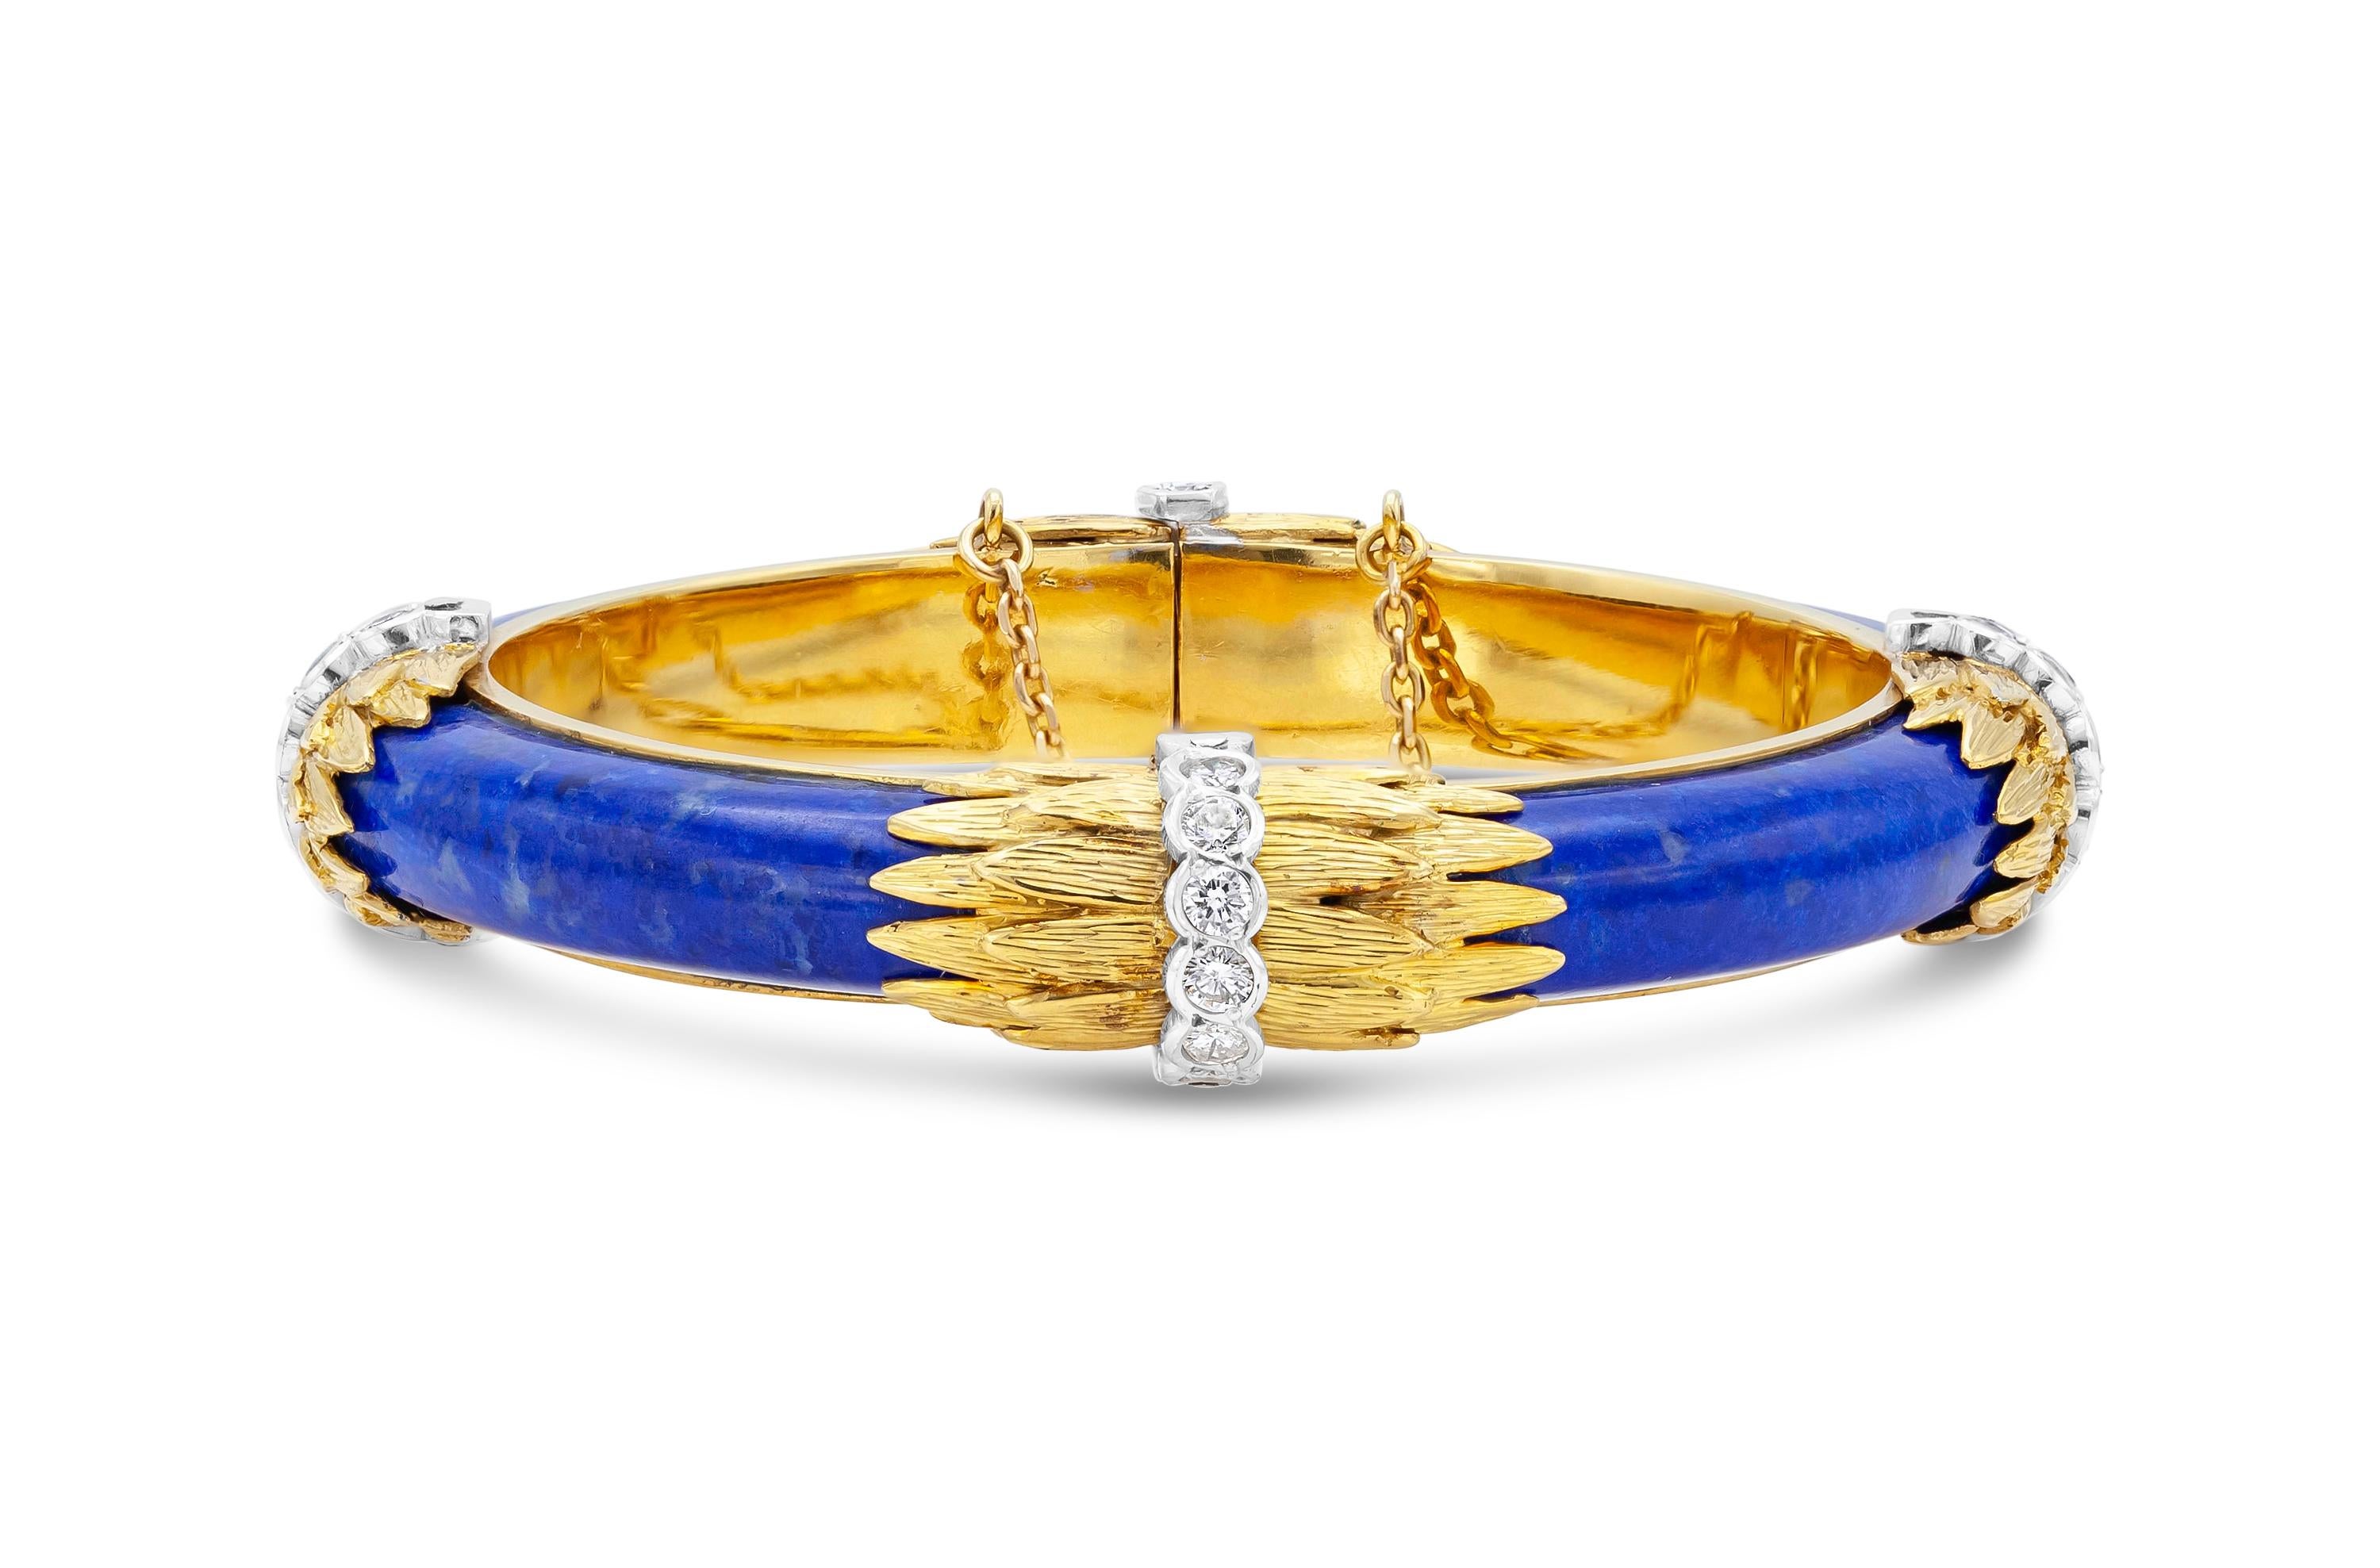 Finely crafted in 18K yellow gold with Lapis Lazuli and round-cut diamonds weighing approximately a total of 1.30 carats.
French hallmarks
Size 6 1/2 inches.